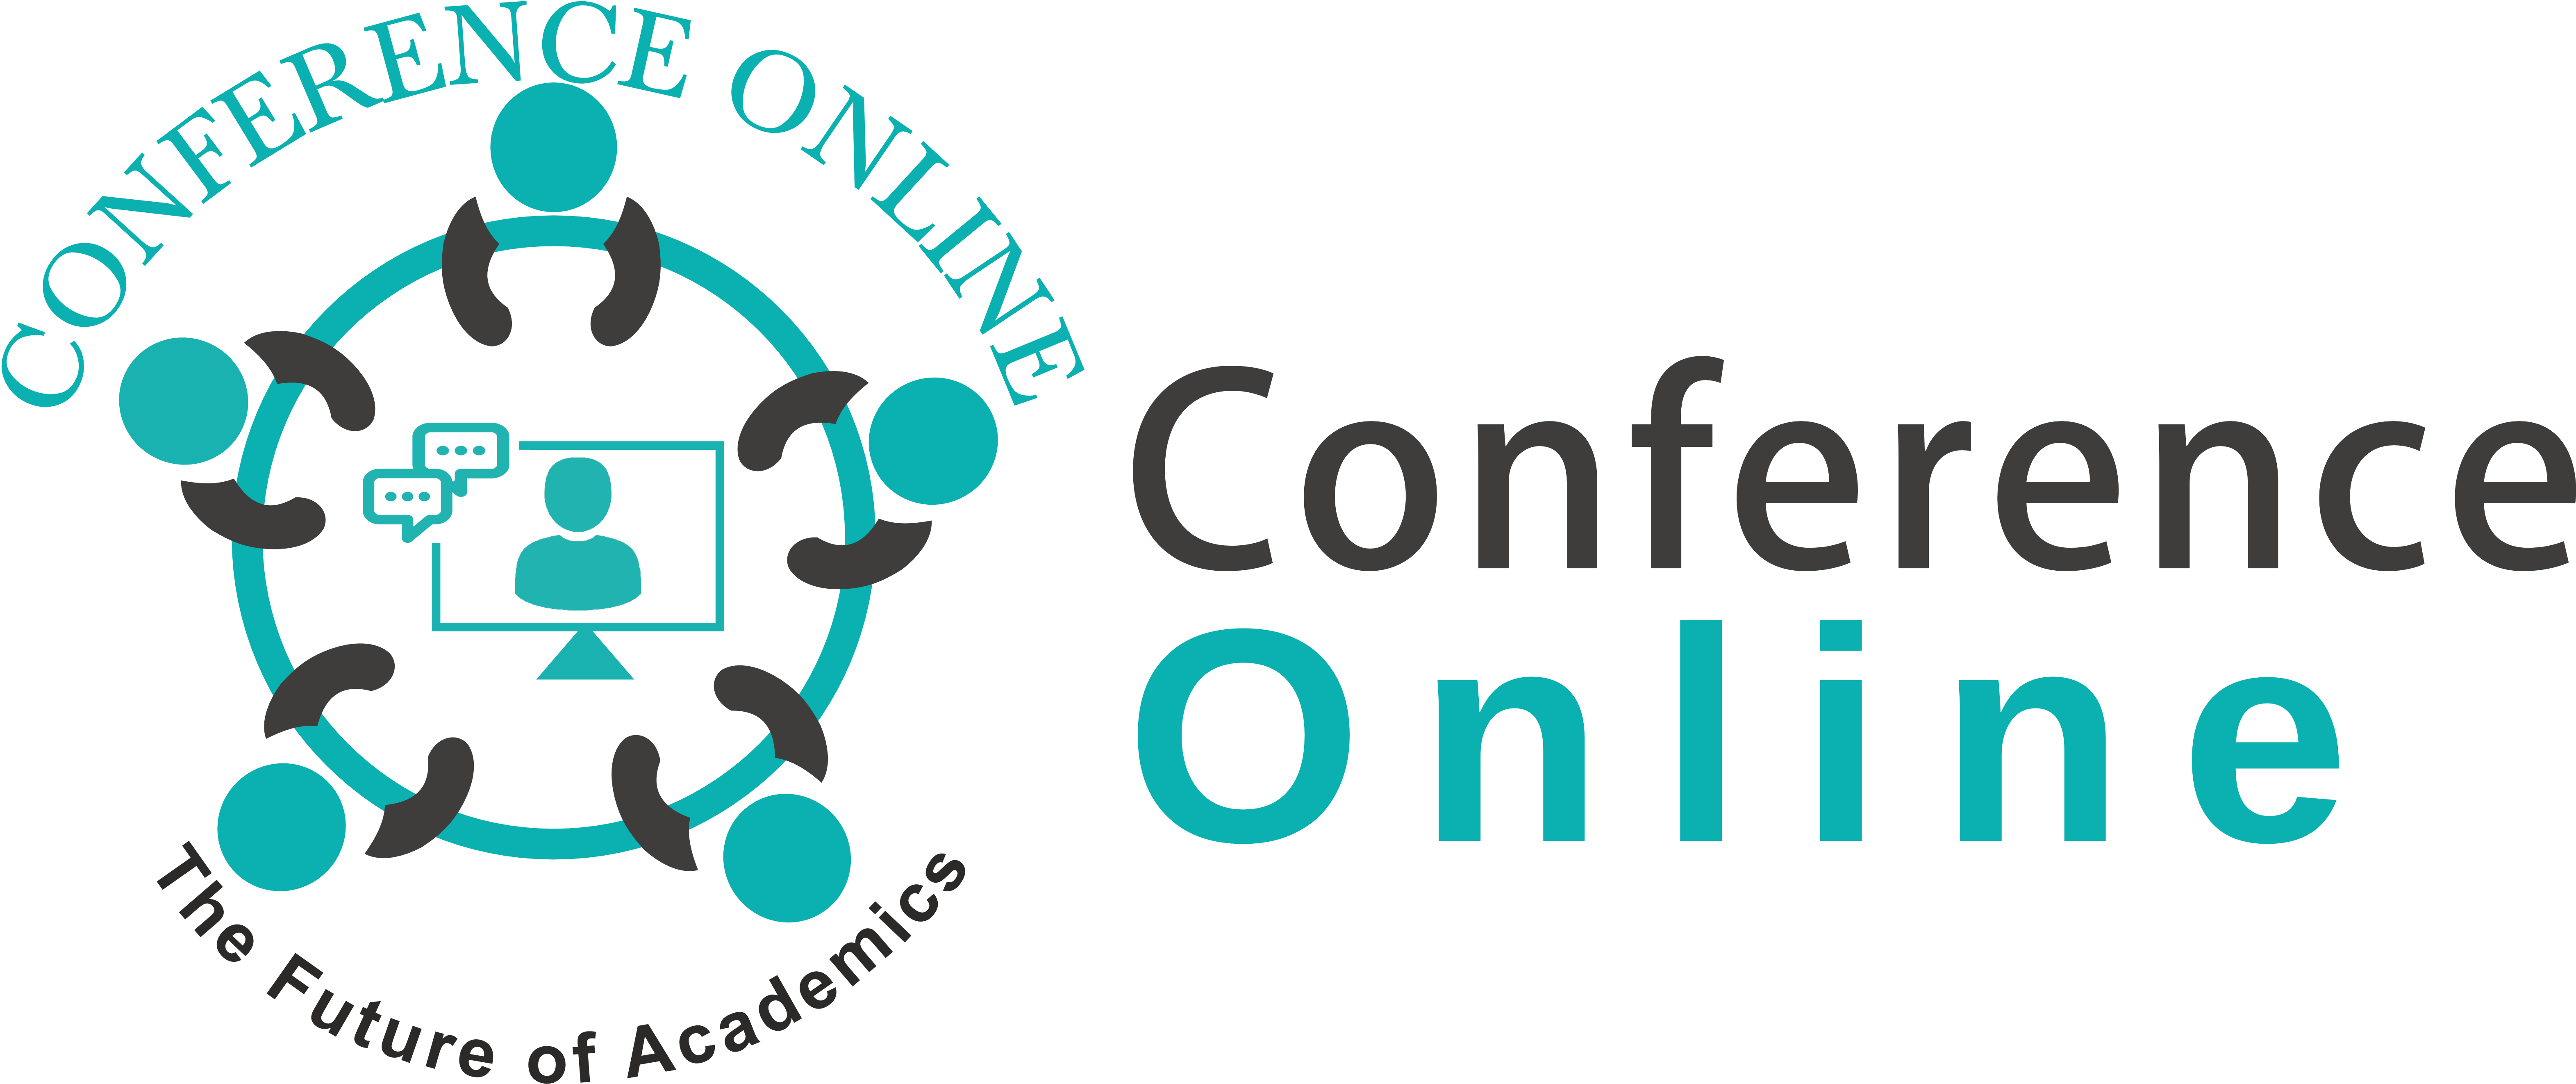 Conference Online